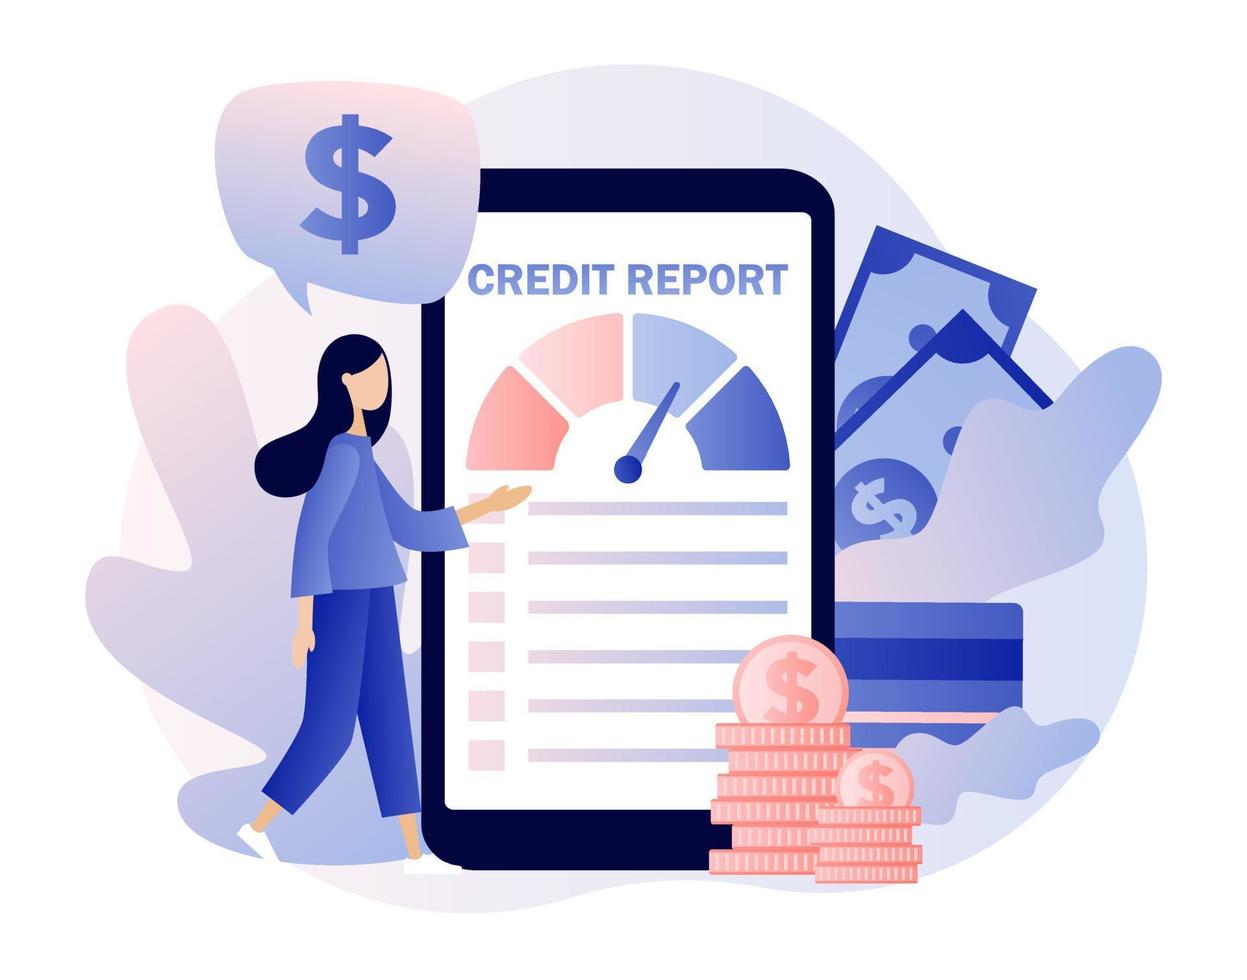 Credit report online. Credit rating in app. Personal credit score information. Tiny woman analysts credit risk control. Modern flat cartoon style. Vector illustration on white background